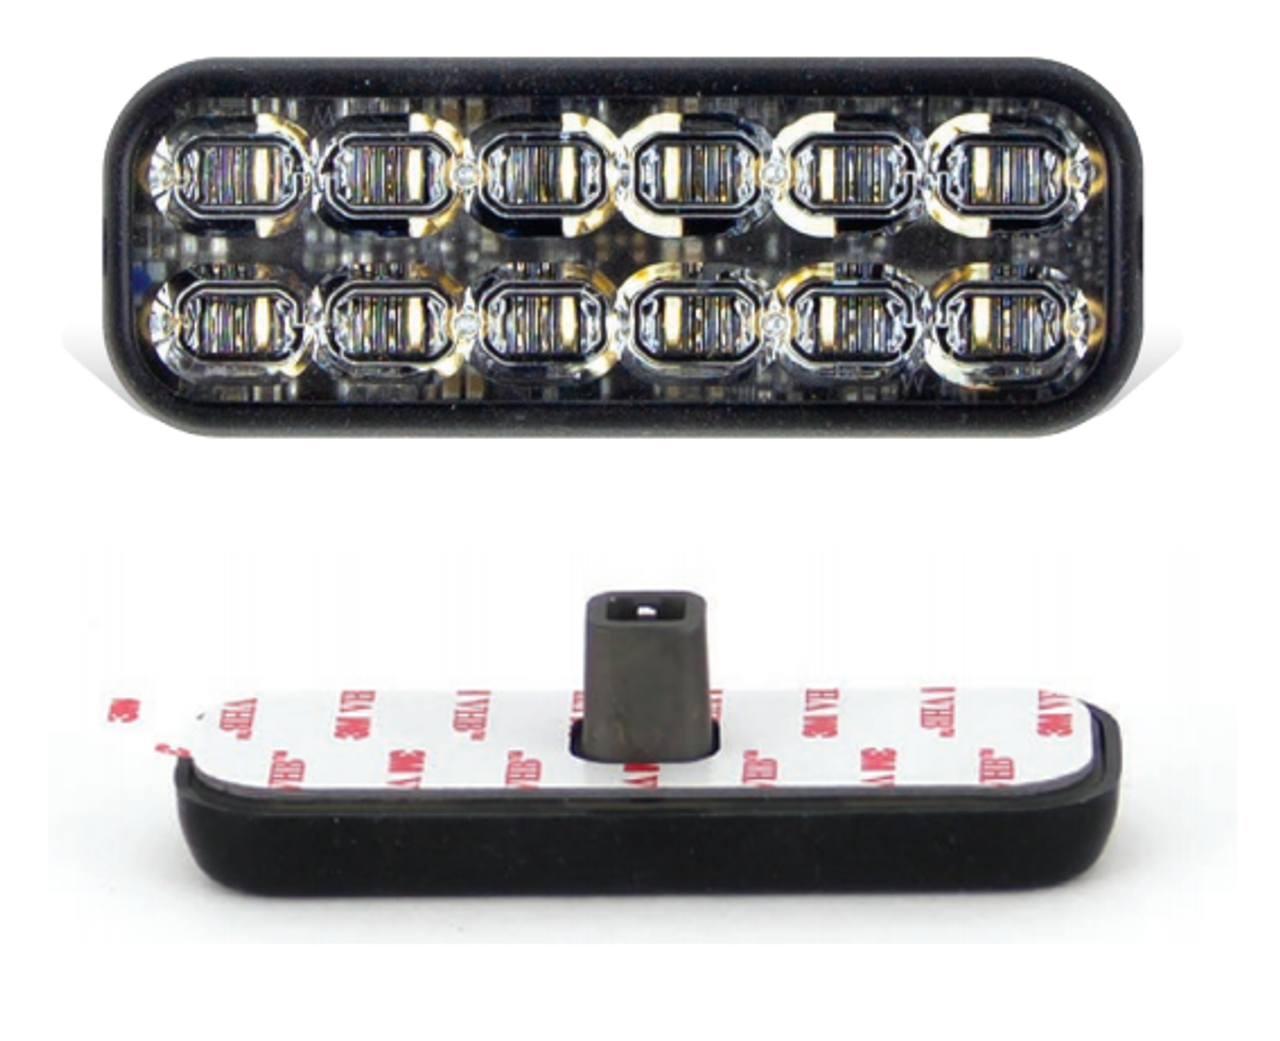 SoundOff Signal mPOWER Fascia 4 x 2 inch LED Light Head, Double, Stacked, 36-LED (3 colors) per head, RED/AMBER/WHITE, Silicone housing, Quick (Surface or Flush), EMPSA08RM-5 (Same as EMPSA05BU-5)